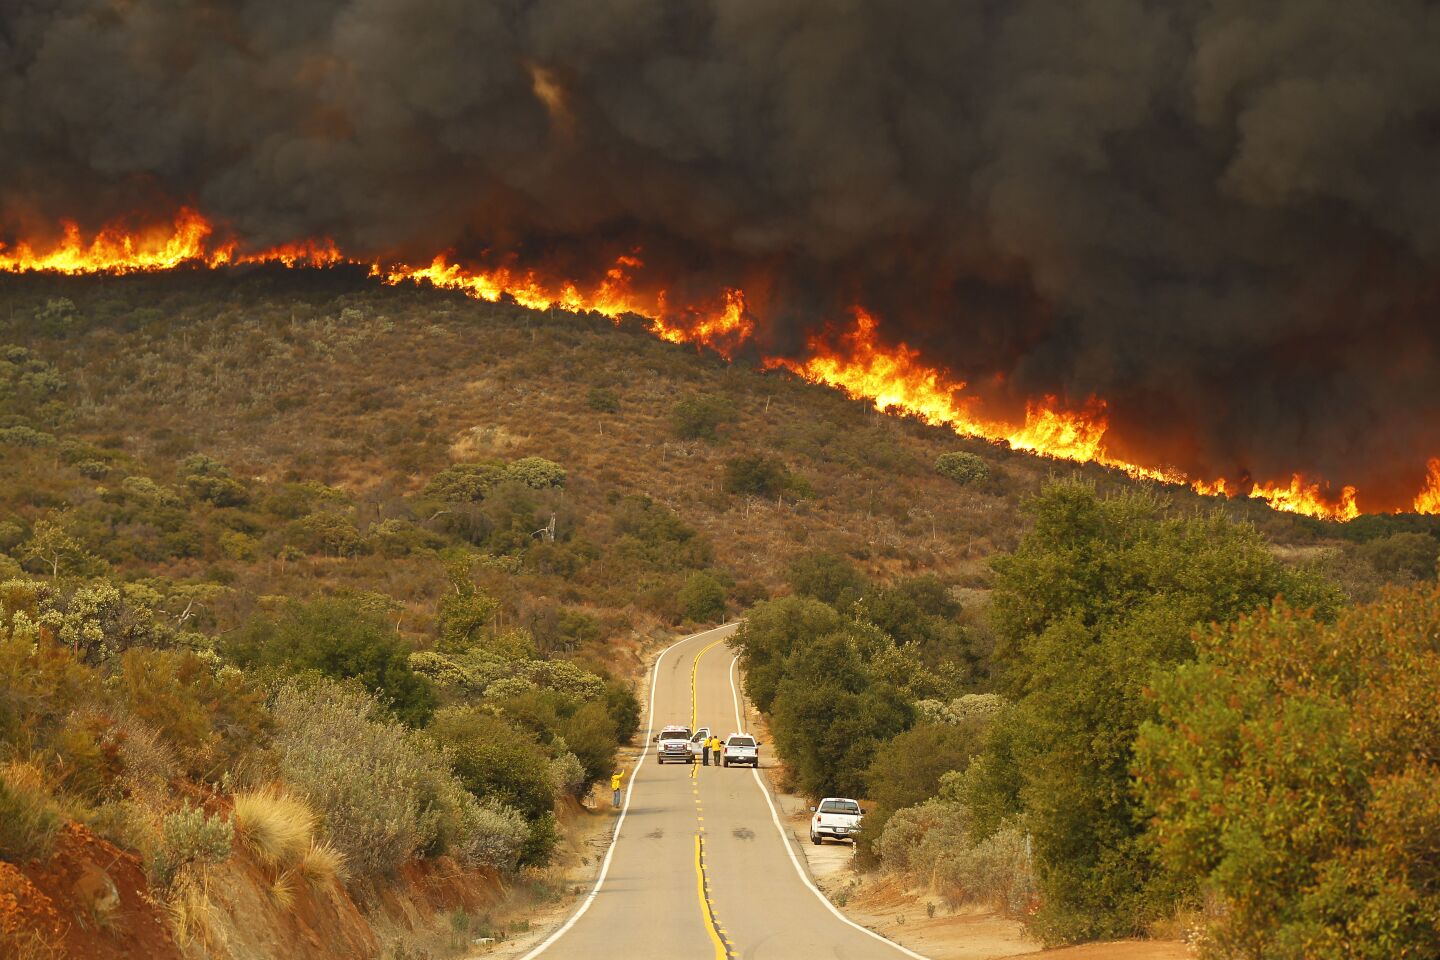 Valley Fire